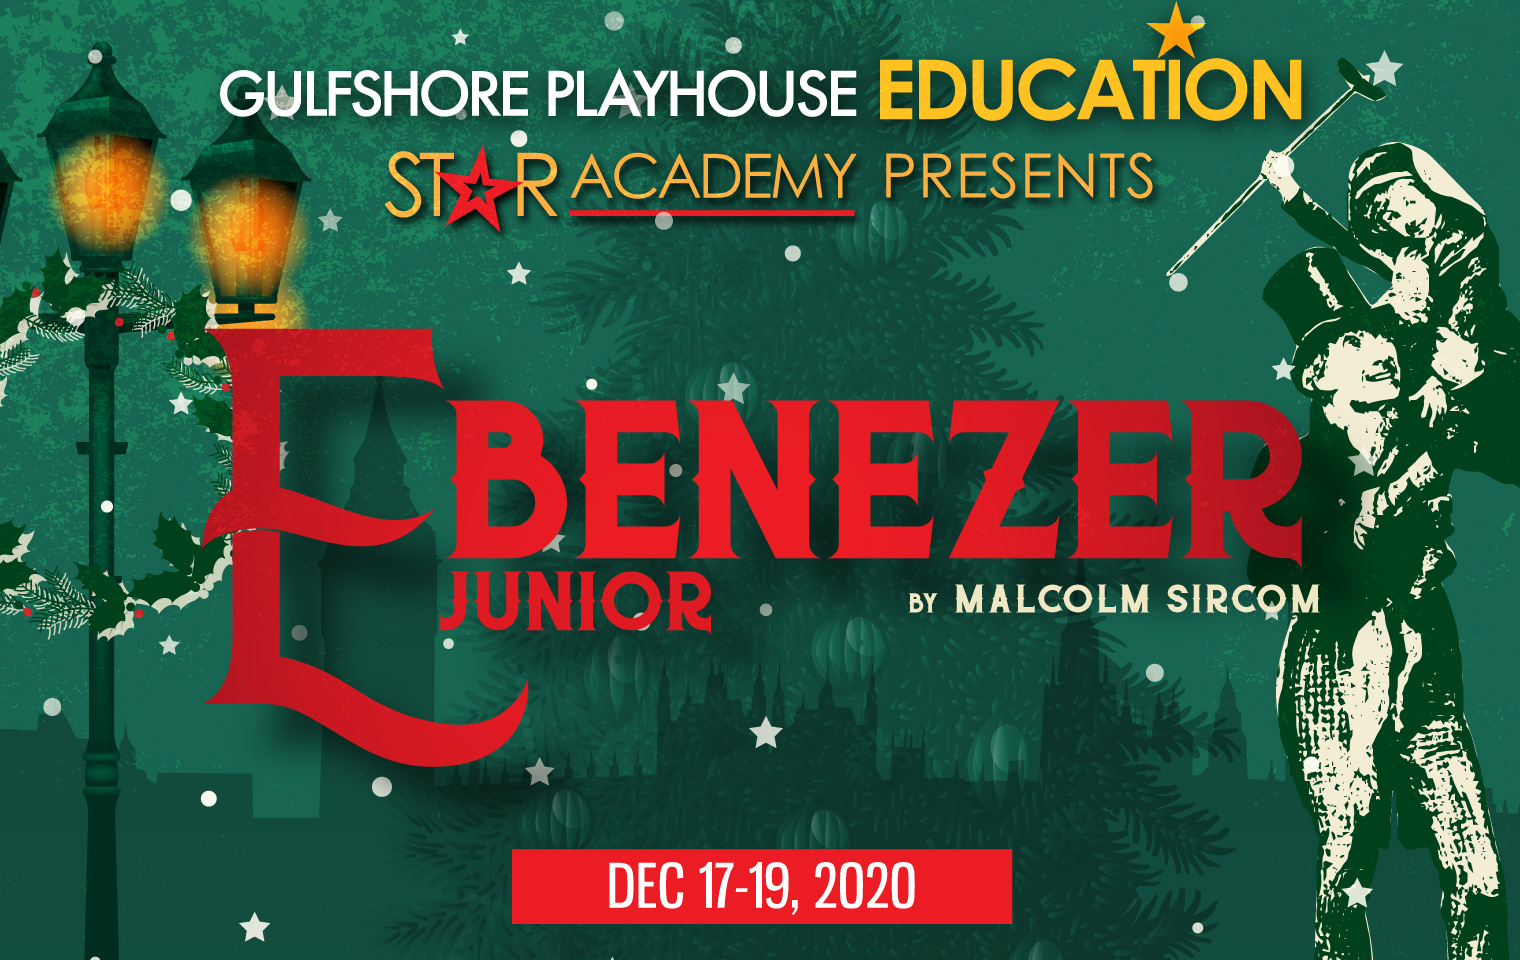 In “Ebenezer Junior,” Charles Dickens’s beloved and timeless tale “A Christmas Carol”